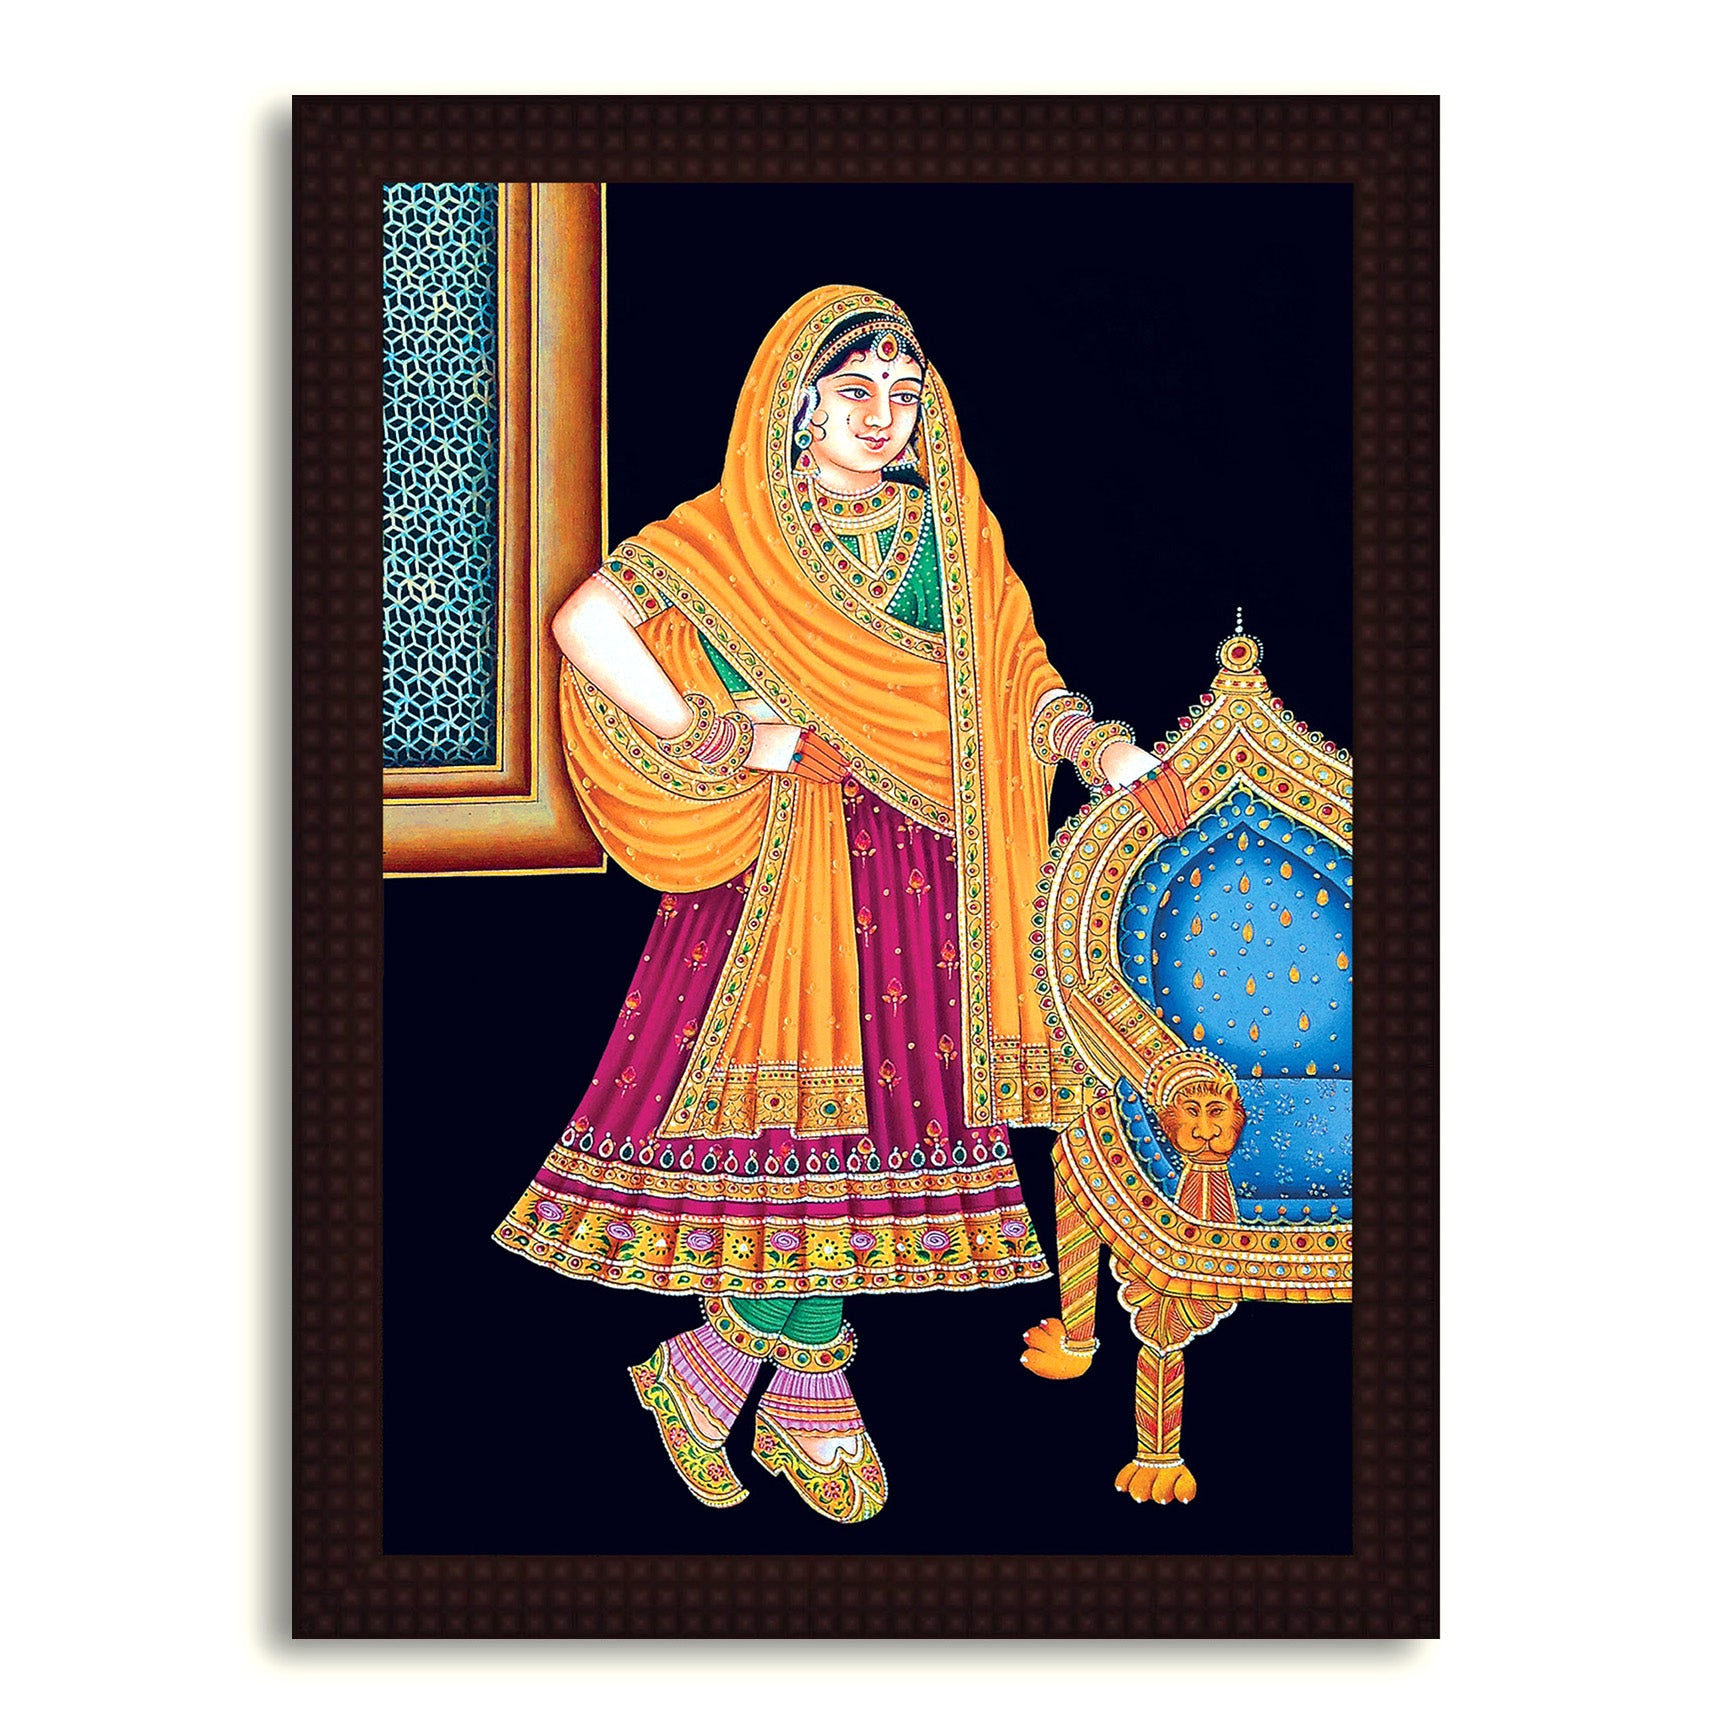 Rajasthani Queen